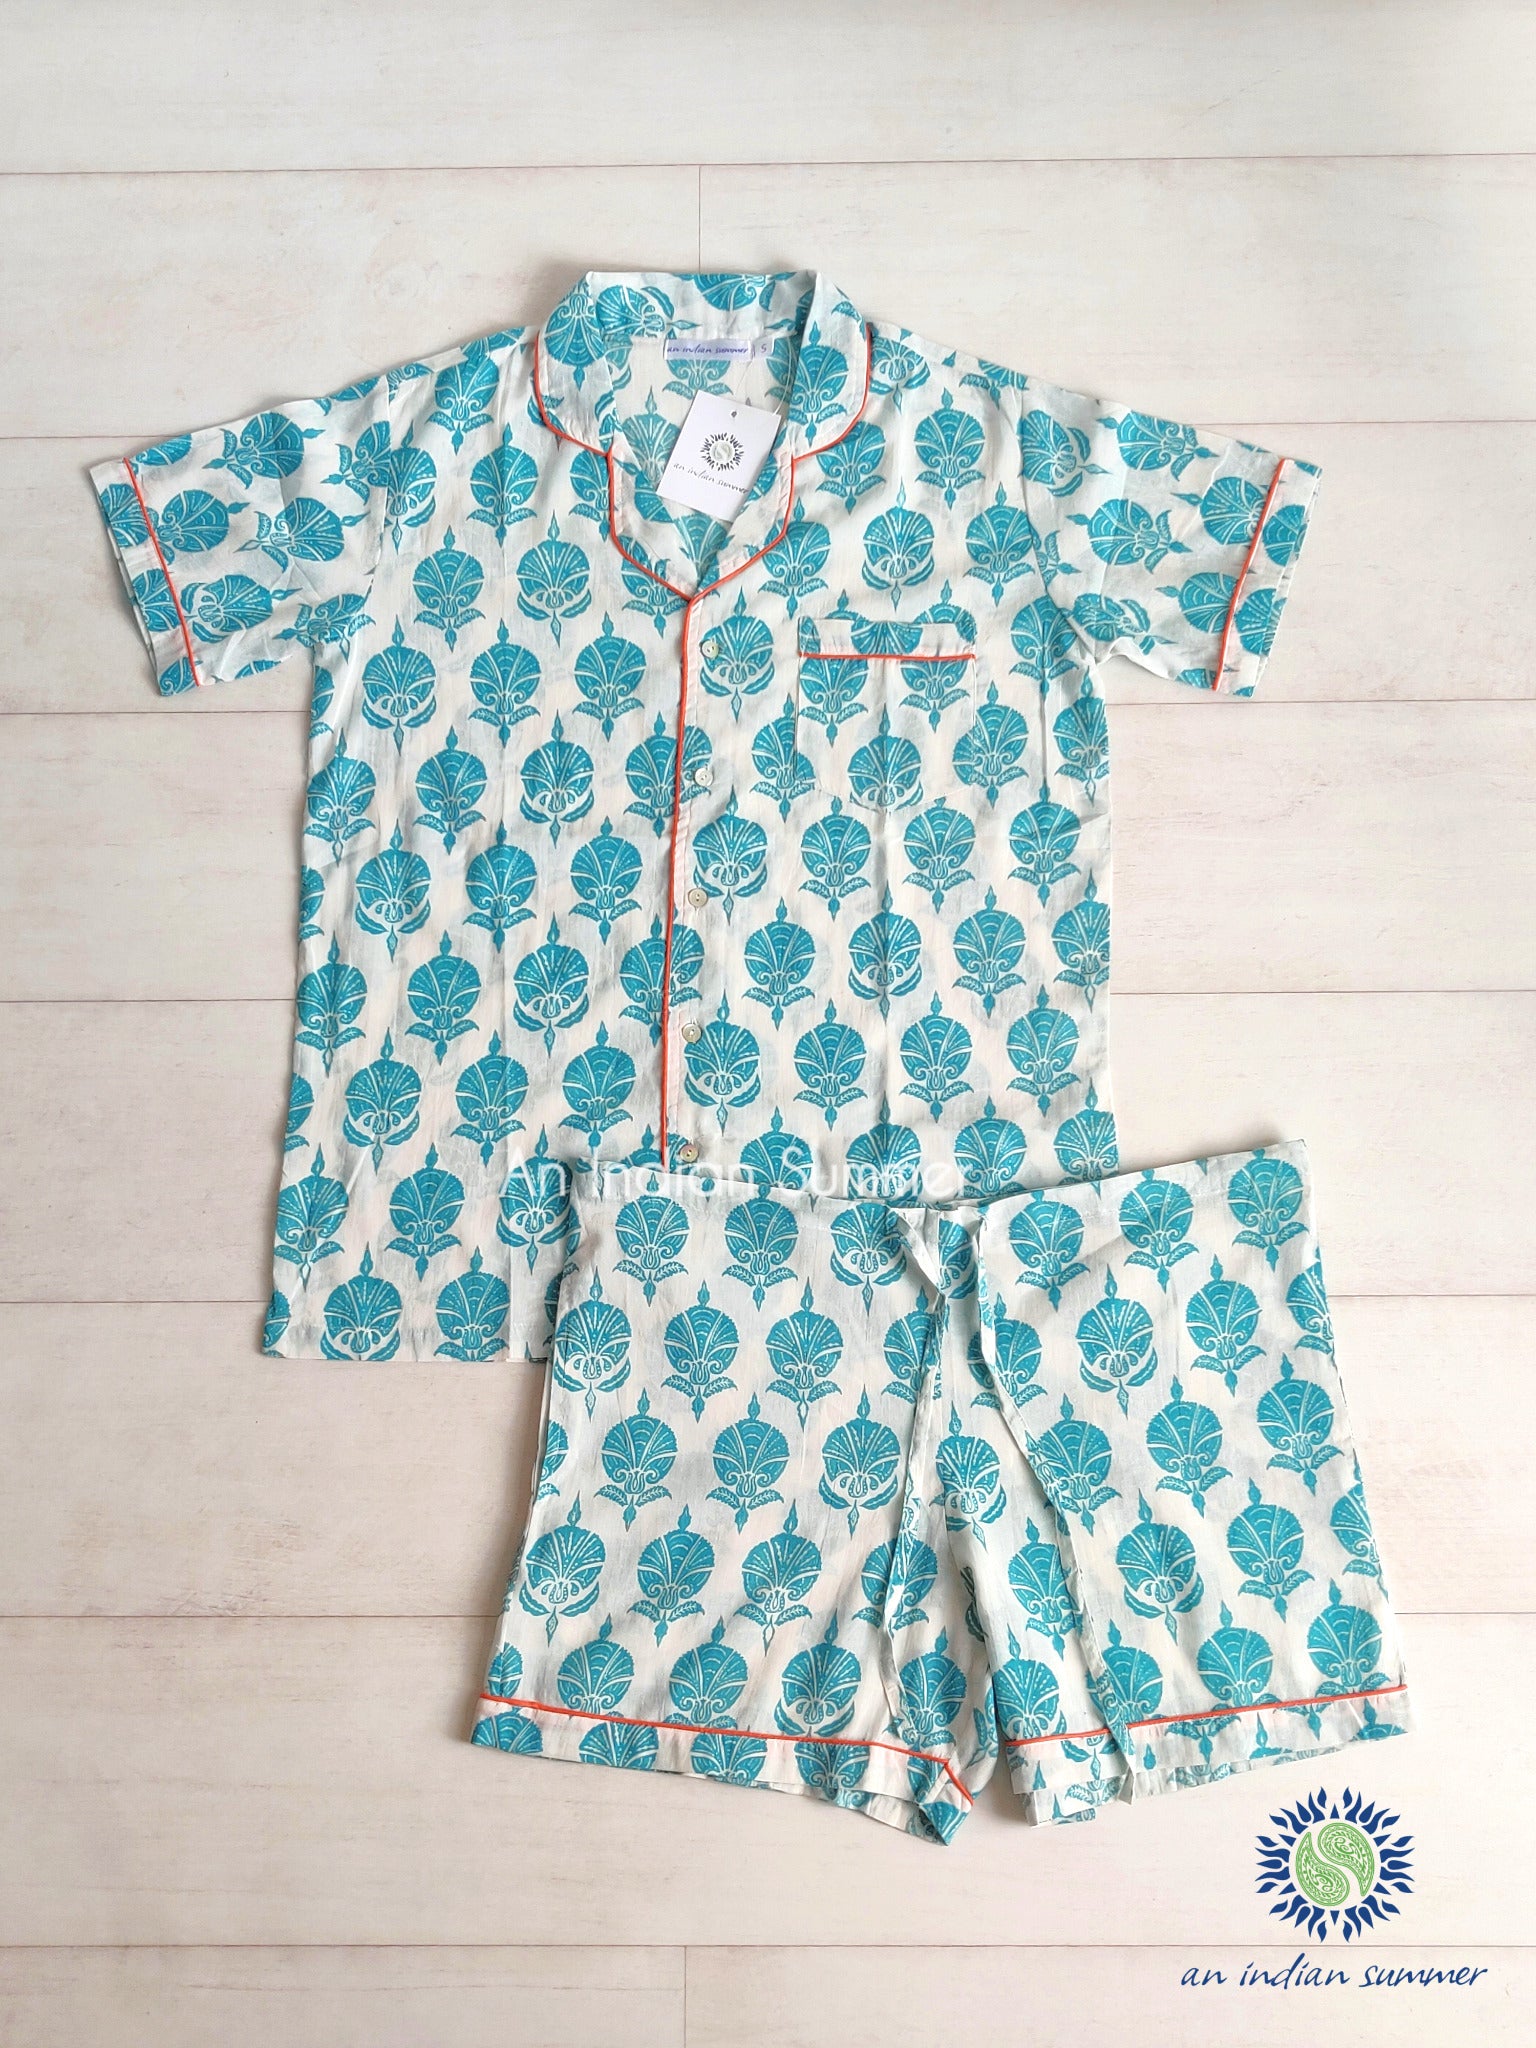 Short Pyjama Set Ottoman Flower | Turquoise with Coral Contrast Details | Hand Block Printed Cotton Voile | An Indian Summer | Authentic Timeless Sustainable Ethical Artisan Conscious Responsible Clothing